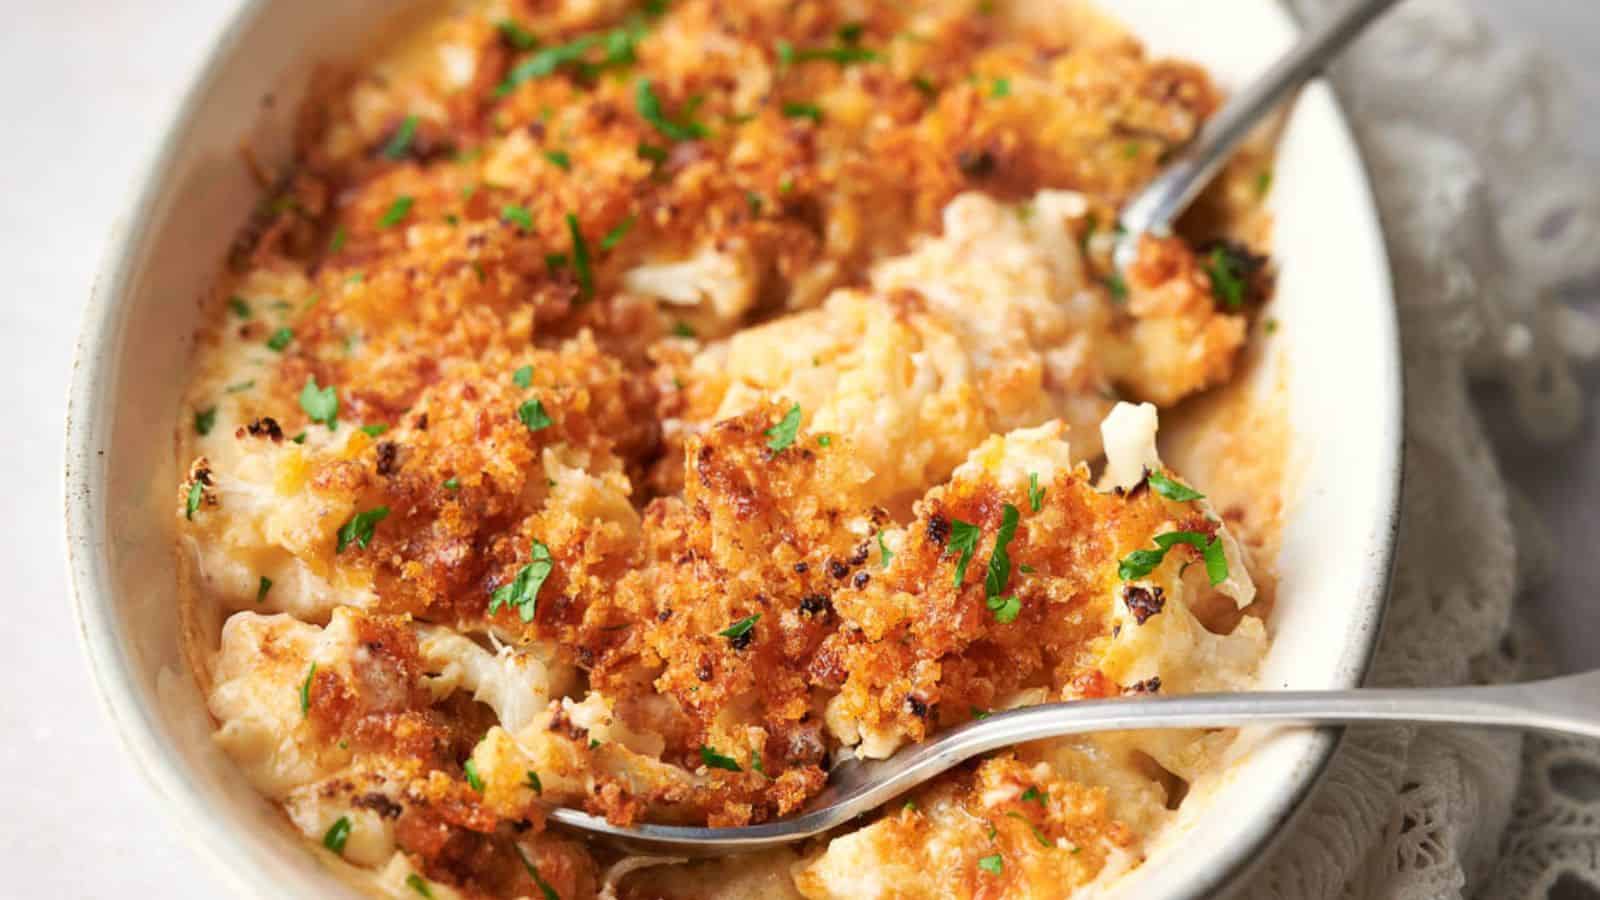 Dinner made easy: 13 simple casseroles with maximum flavor